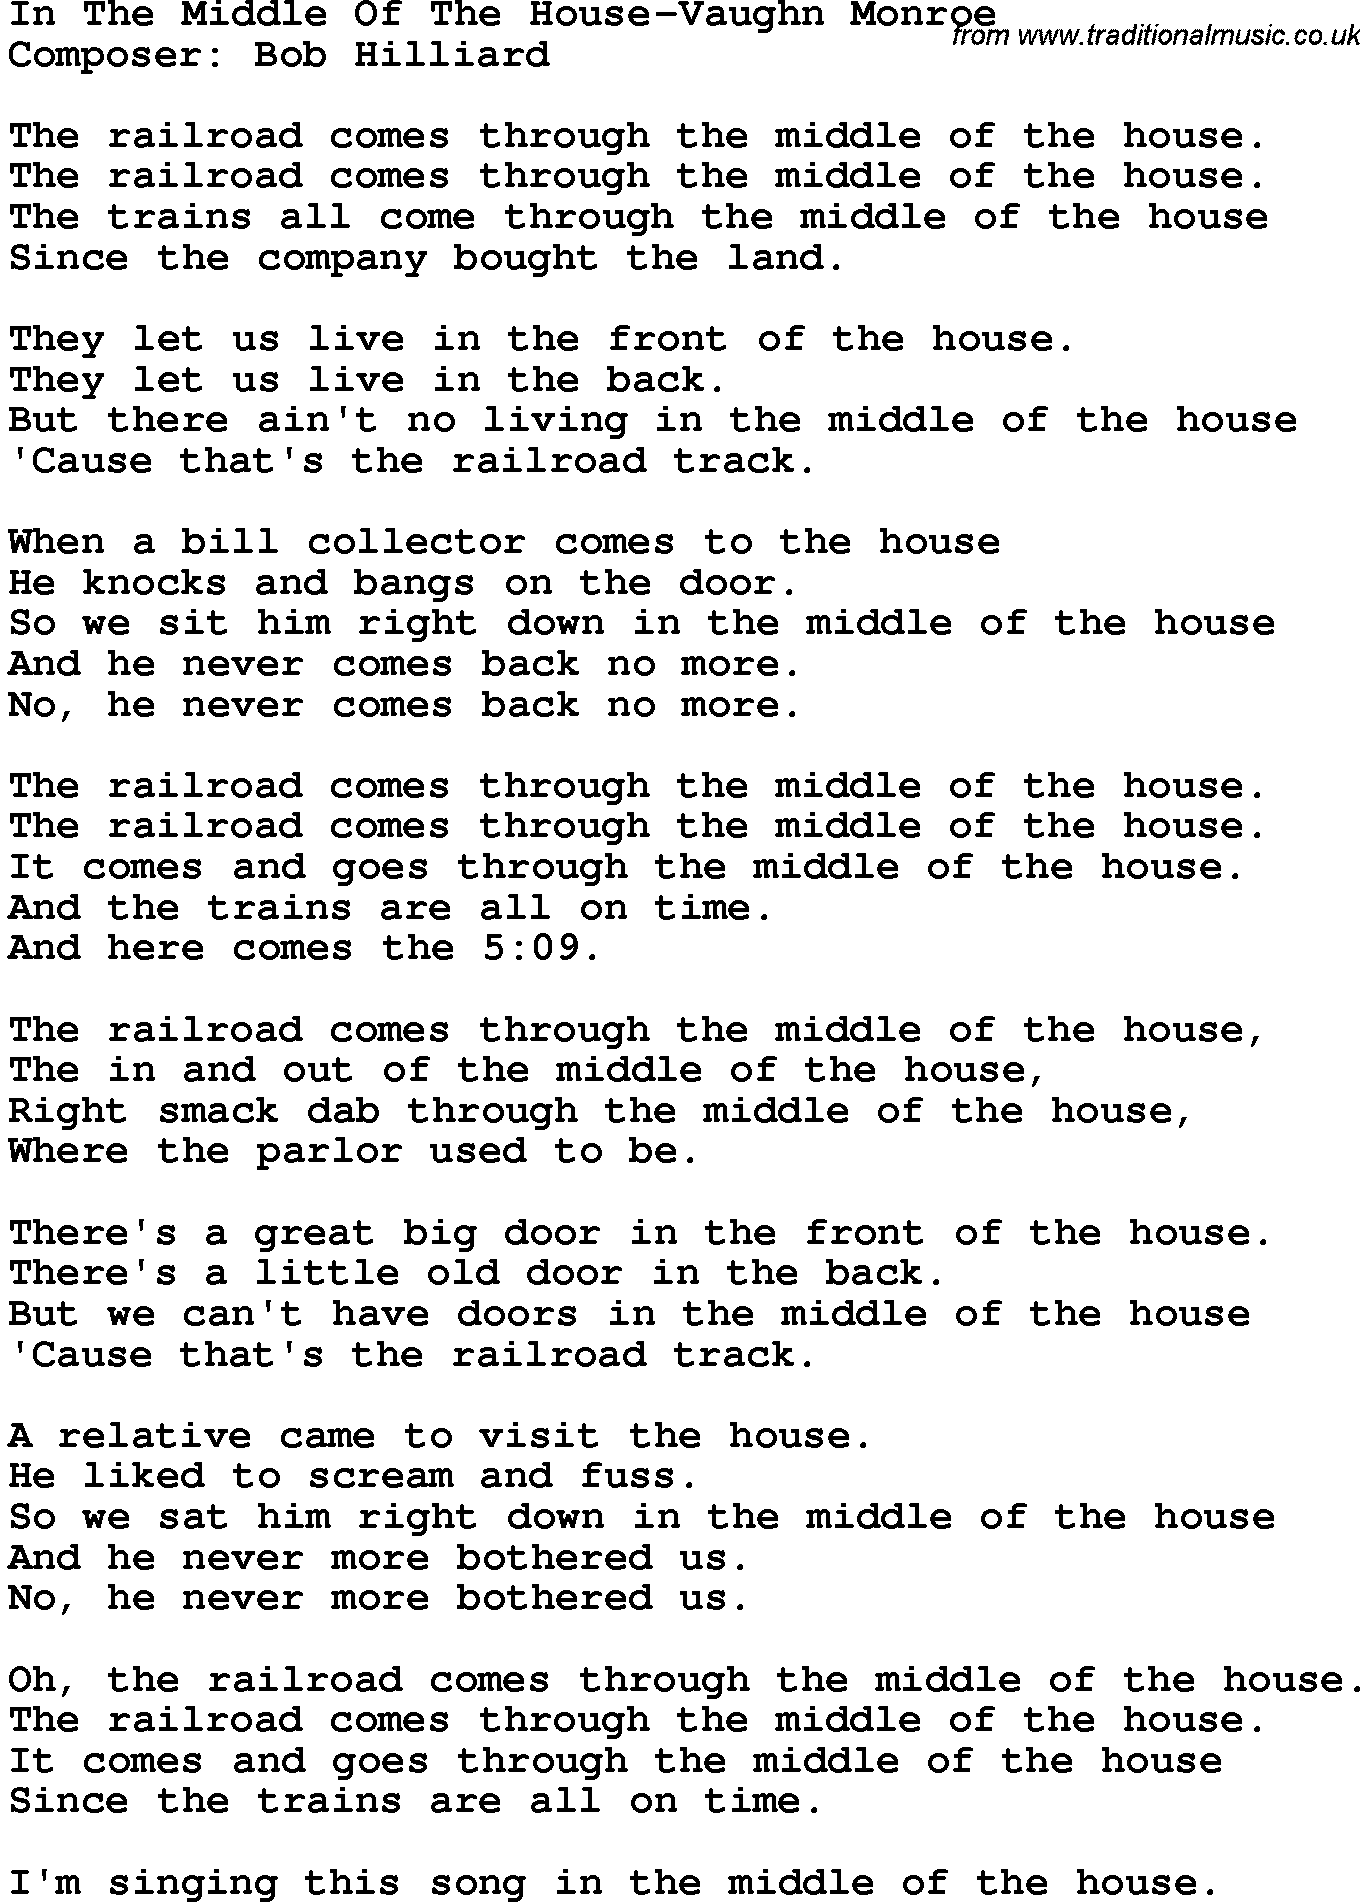 Novelty song: In The Middle Of The House-Vaughn Monroe lyrics